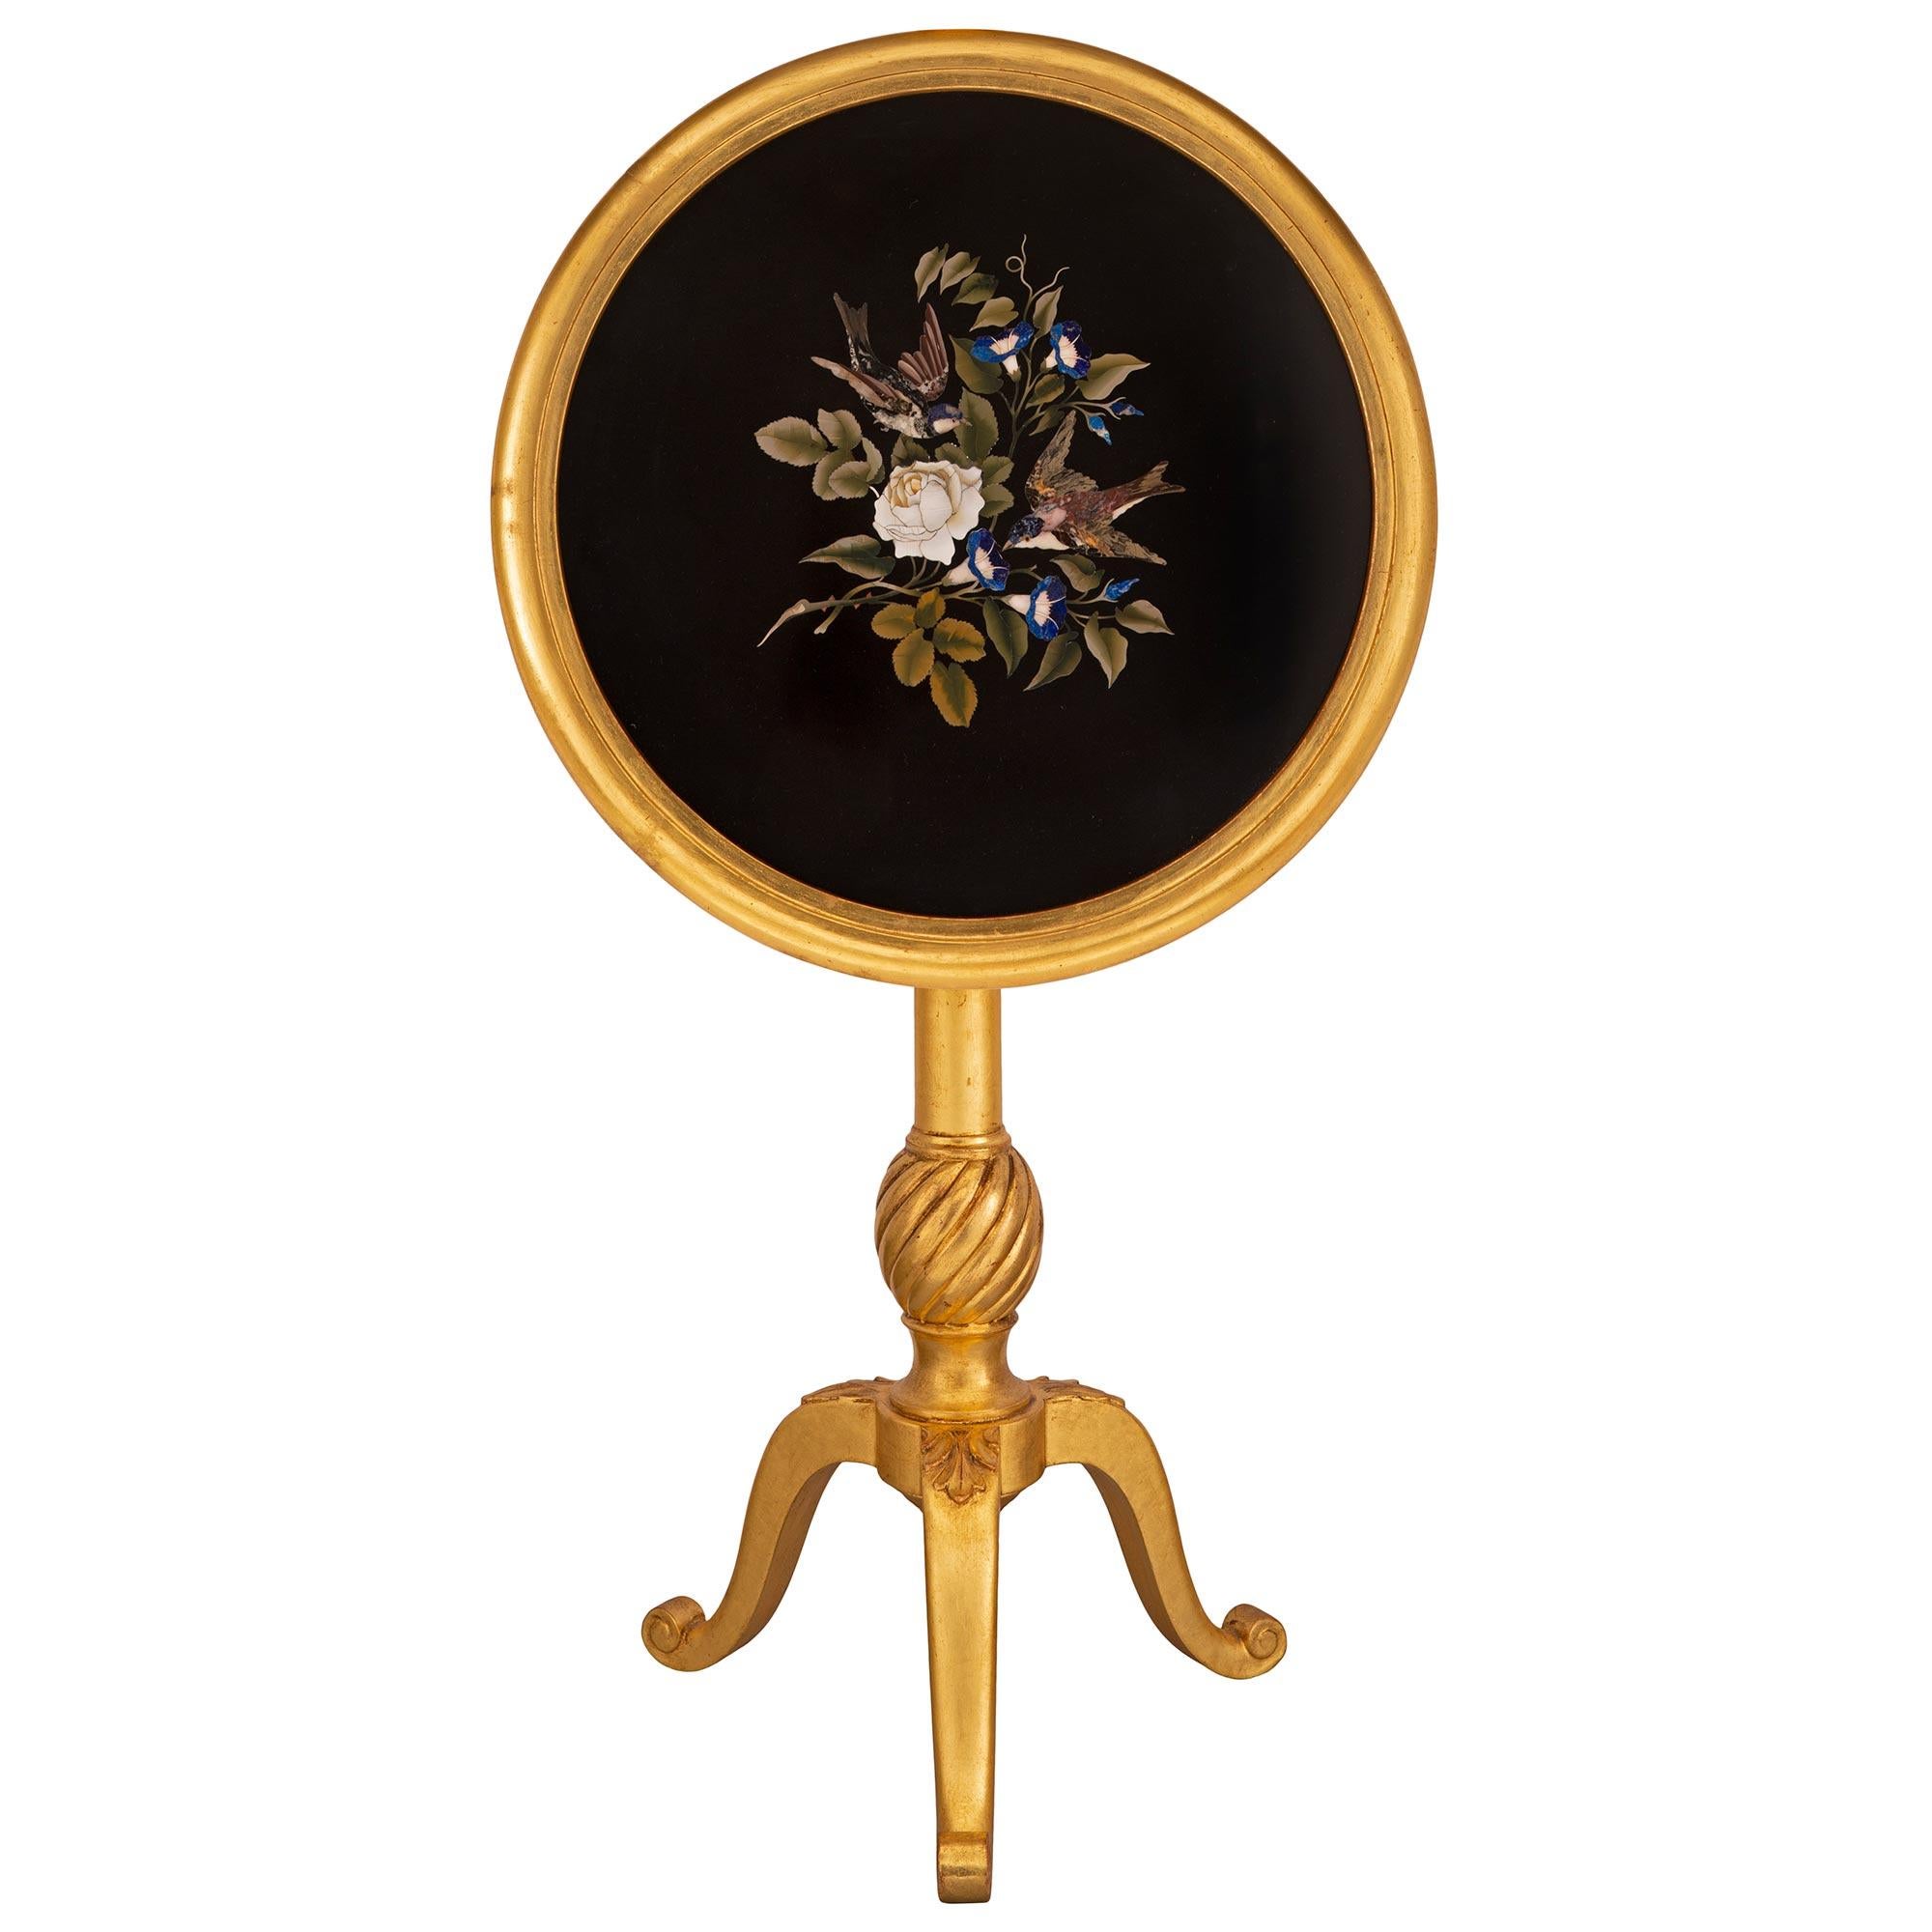 A striking and most elegant Italian turn of the century Florentine st. giltwood and pietra dura marble side table. The circular inlaid tilt top side table is raised by three elegantly curved legs with fine scrolled feet and charming palmette